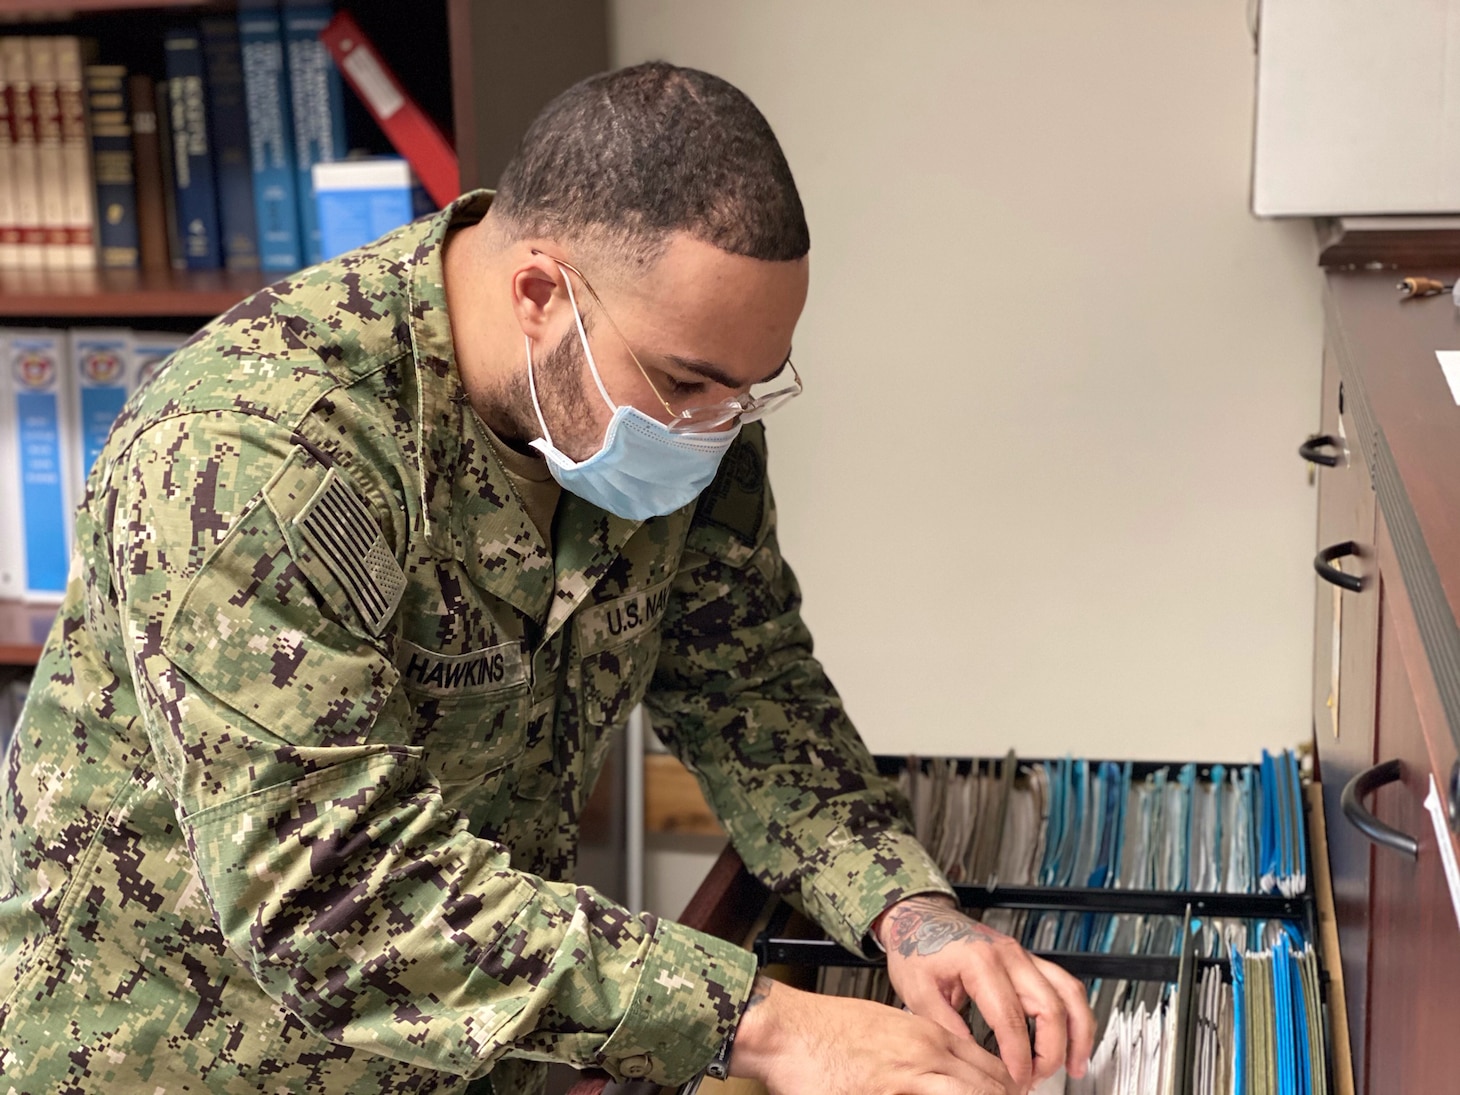 LITTLE ROCK, Arkansas (Jan. 9, 2021) - Damage Controlman 3rd Class Dante Hawkins, assigned as a Medical department representative at Navy Operational Support Center (NOSC) Little Rock, pulls a medical record while conducting physical health assessments of Selected Reservist (SELRES) Sailors during NOSC Little Rock’s first drill weekend of the year. In its effort of taking a more streamlined approach to warfighting readiness in accordance with the Chief of Navy Reserve’s recently released Fighting Instructions, NOSC Little Rock contucted tailored training, performed medical readiness examinations and immunizations, and facilitated establishing communication between SELRES Sailors and their cross-assigned in units. (U.S. Navy photo taken by Electronics Technician 1st Class Stephen Landry/Released)